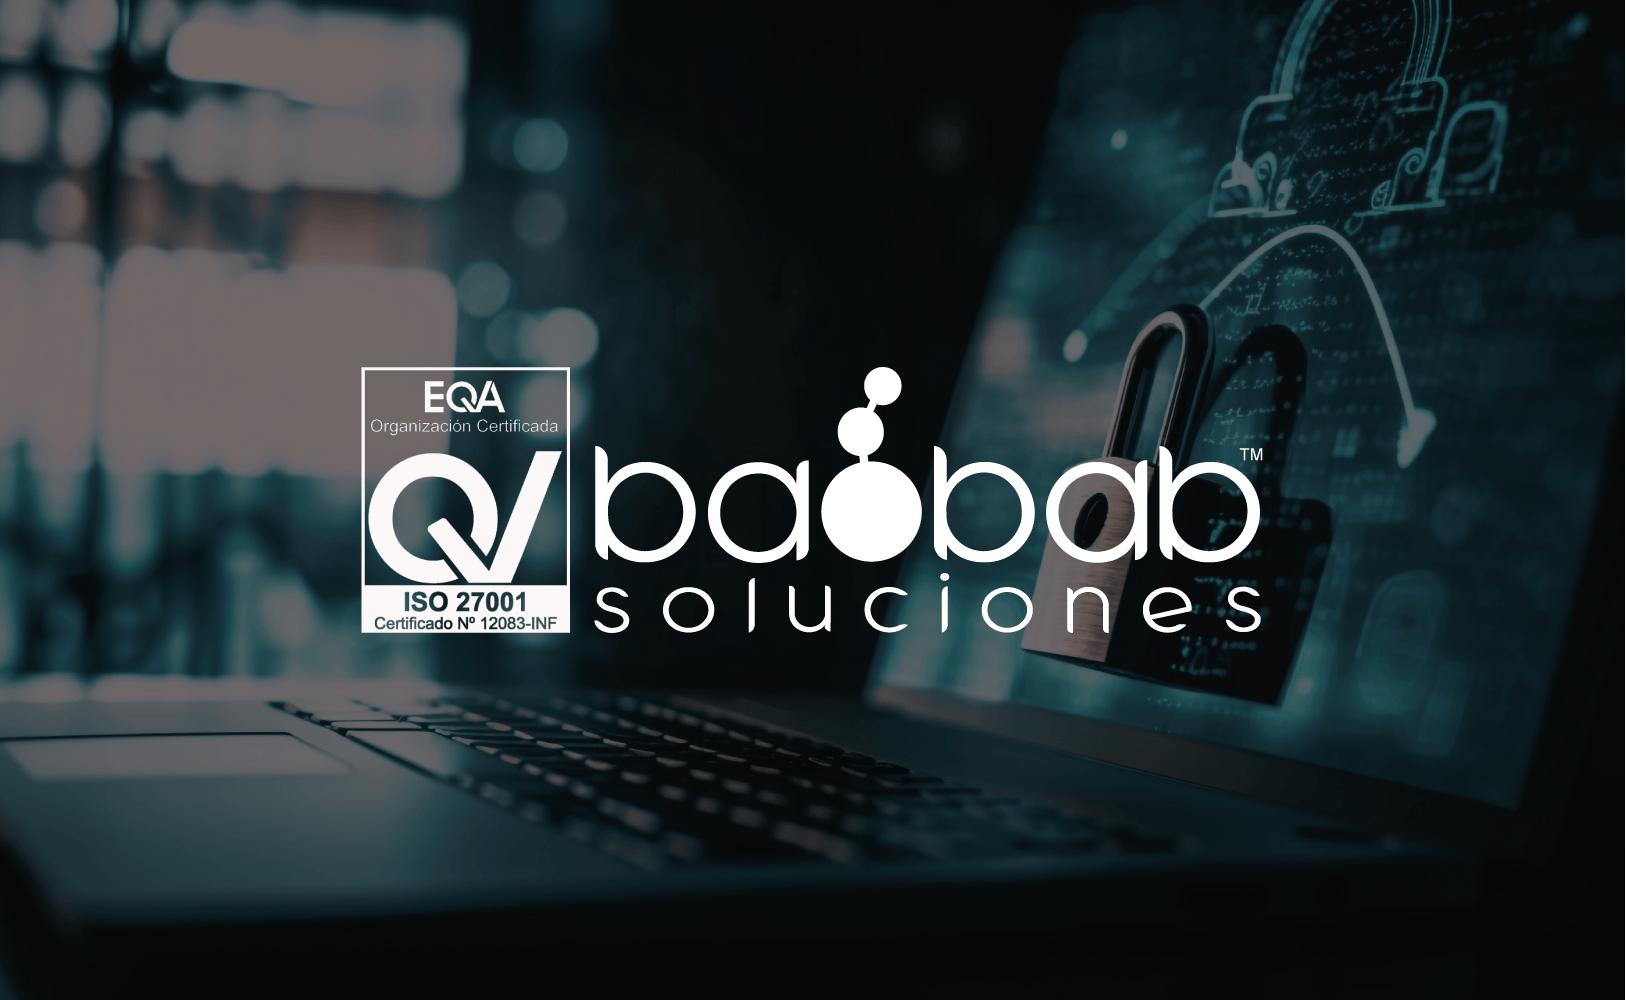 Read more about the article baobab soluciones: a safe company with ISO 27001 certification